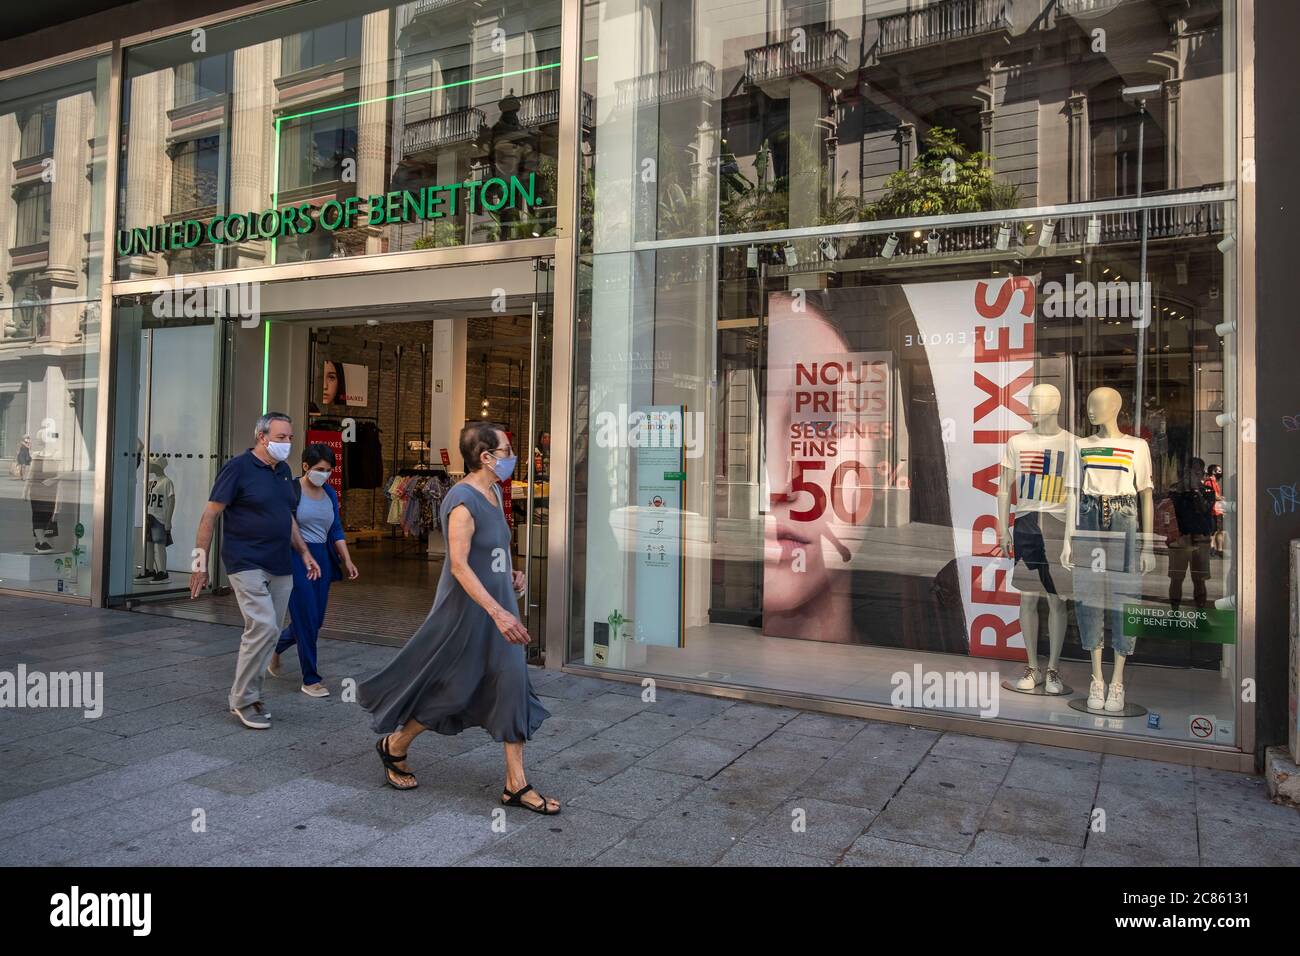 Barcelona, Catalonia, Spain. 21st July, 2020. People passing by the shop  windows with sales promotions of up to 50% of the United Colors of Benetton  store during the coronavirus pandemic.Due to the